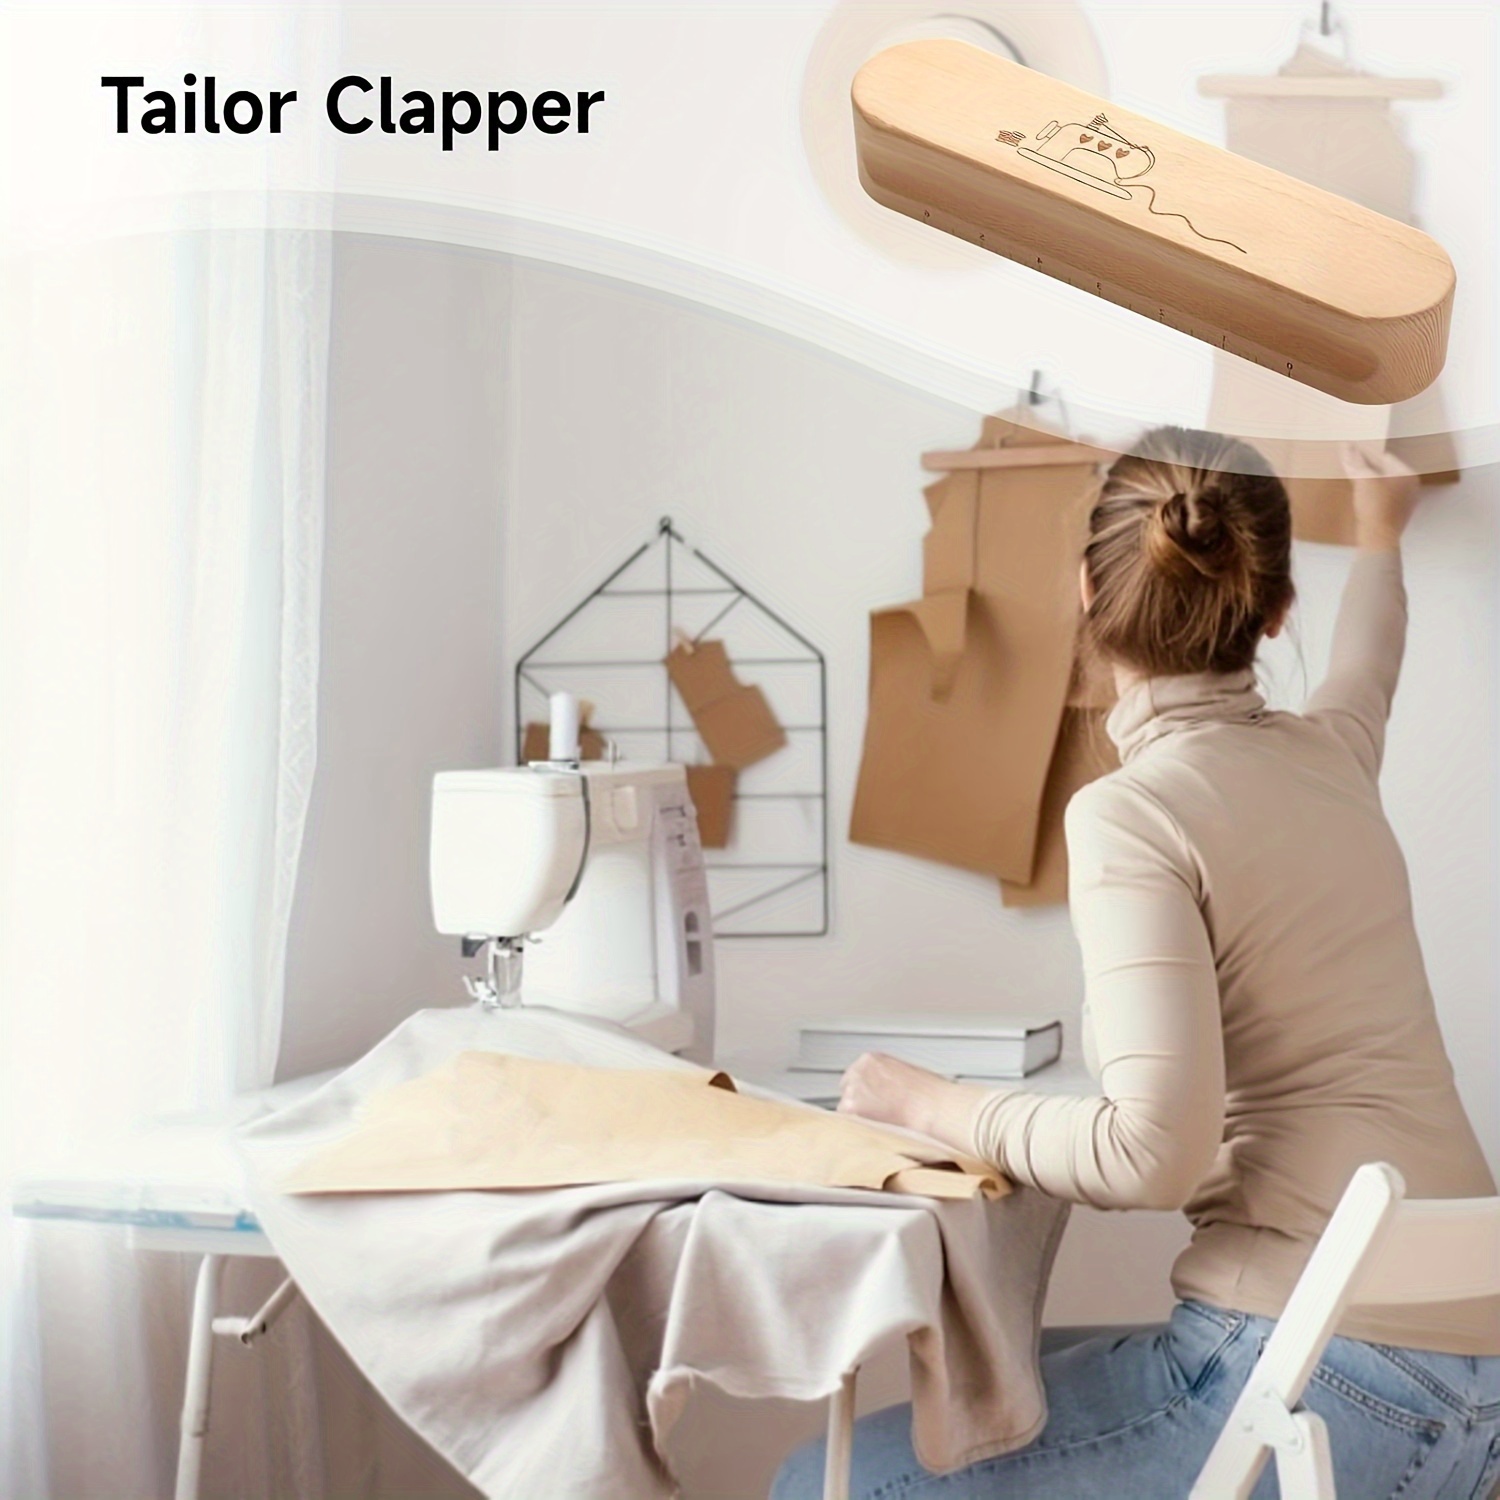 Hardwood Tailors Clapper, Quilters Pressing and Seam Flattening